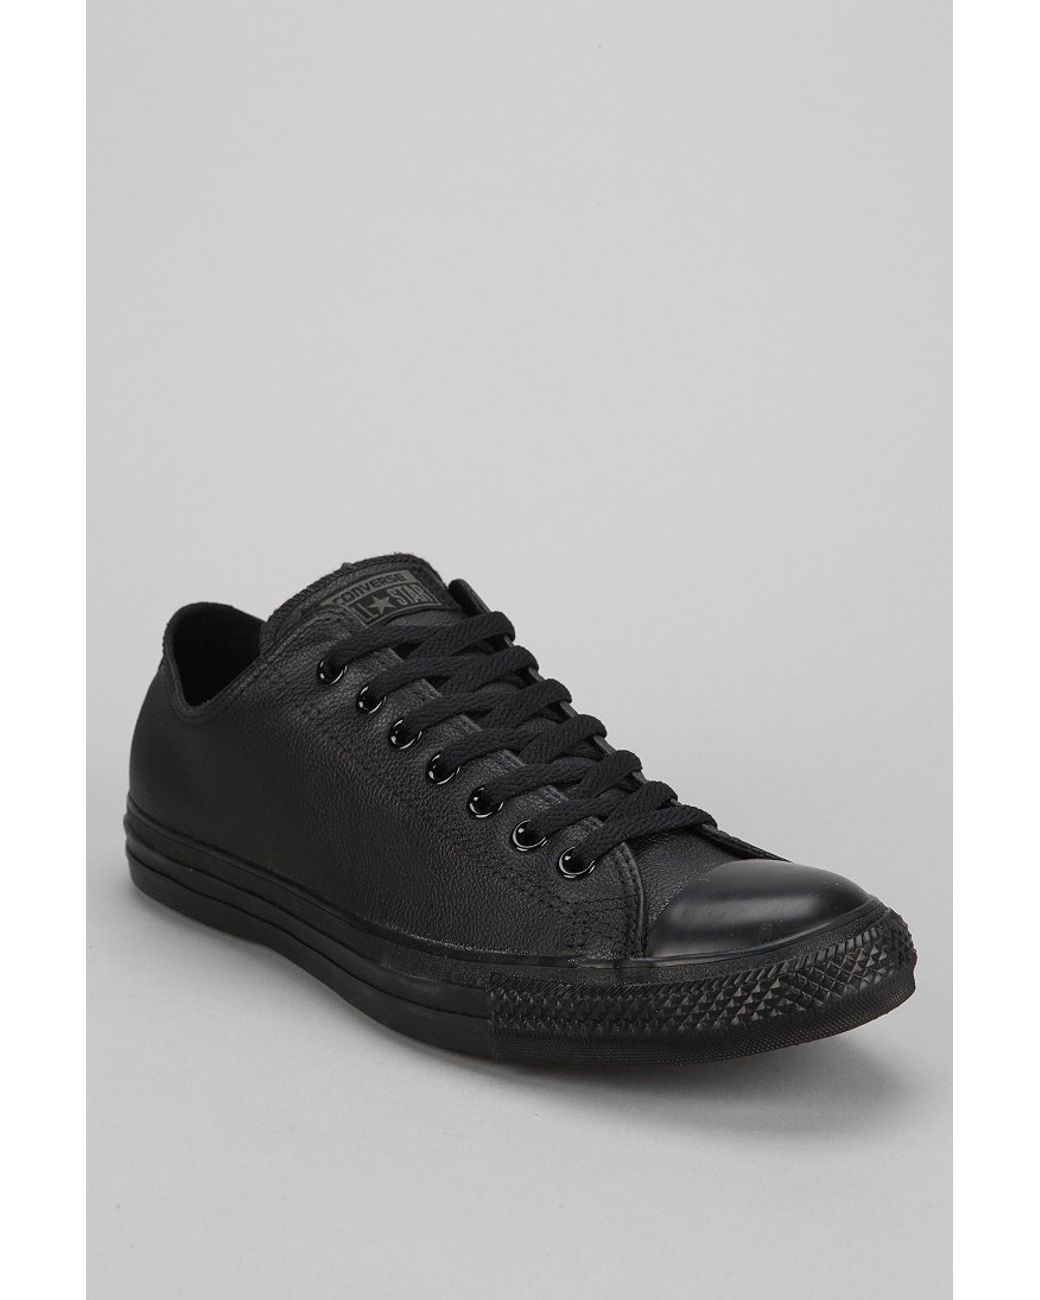 Converse Chuck Taylor All Star Leather Low-Top Men'S Sneaker in Black for Men Lyst